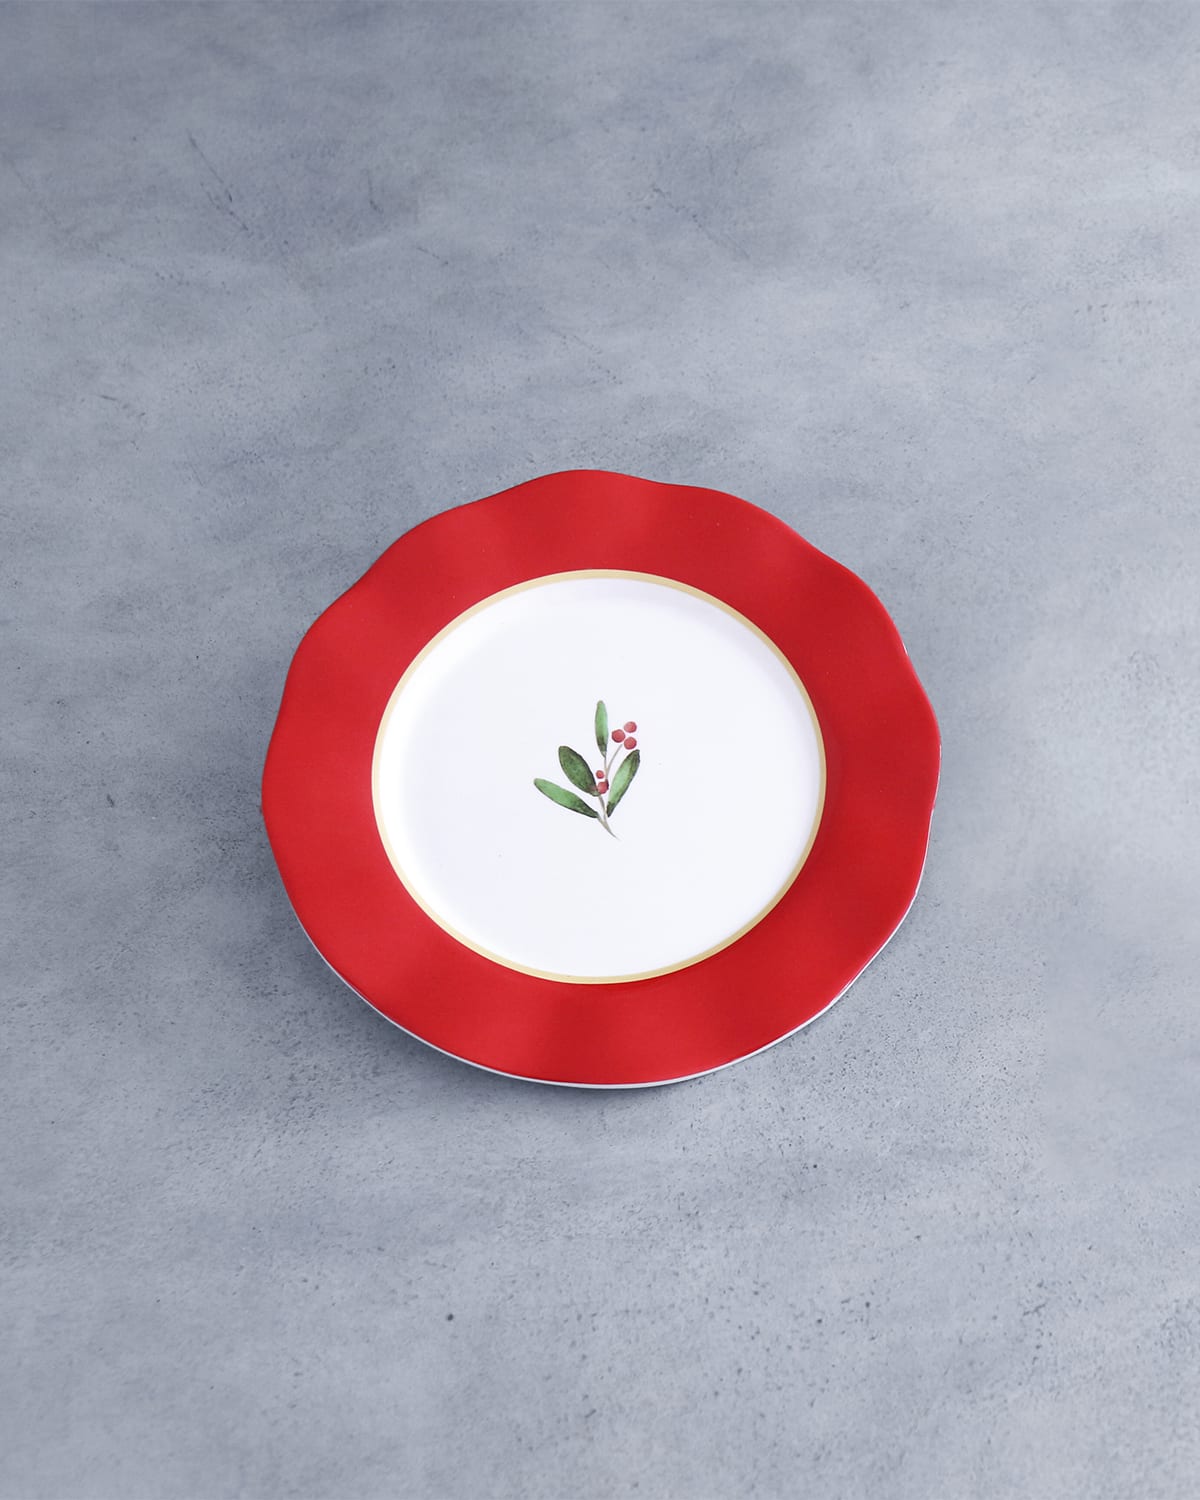 VIDA Holly 9" Salad Plates, Set of 4 (Red and White)